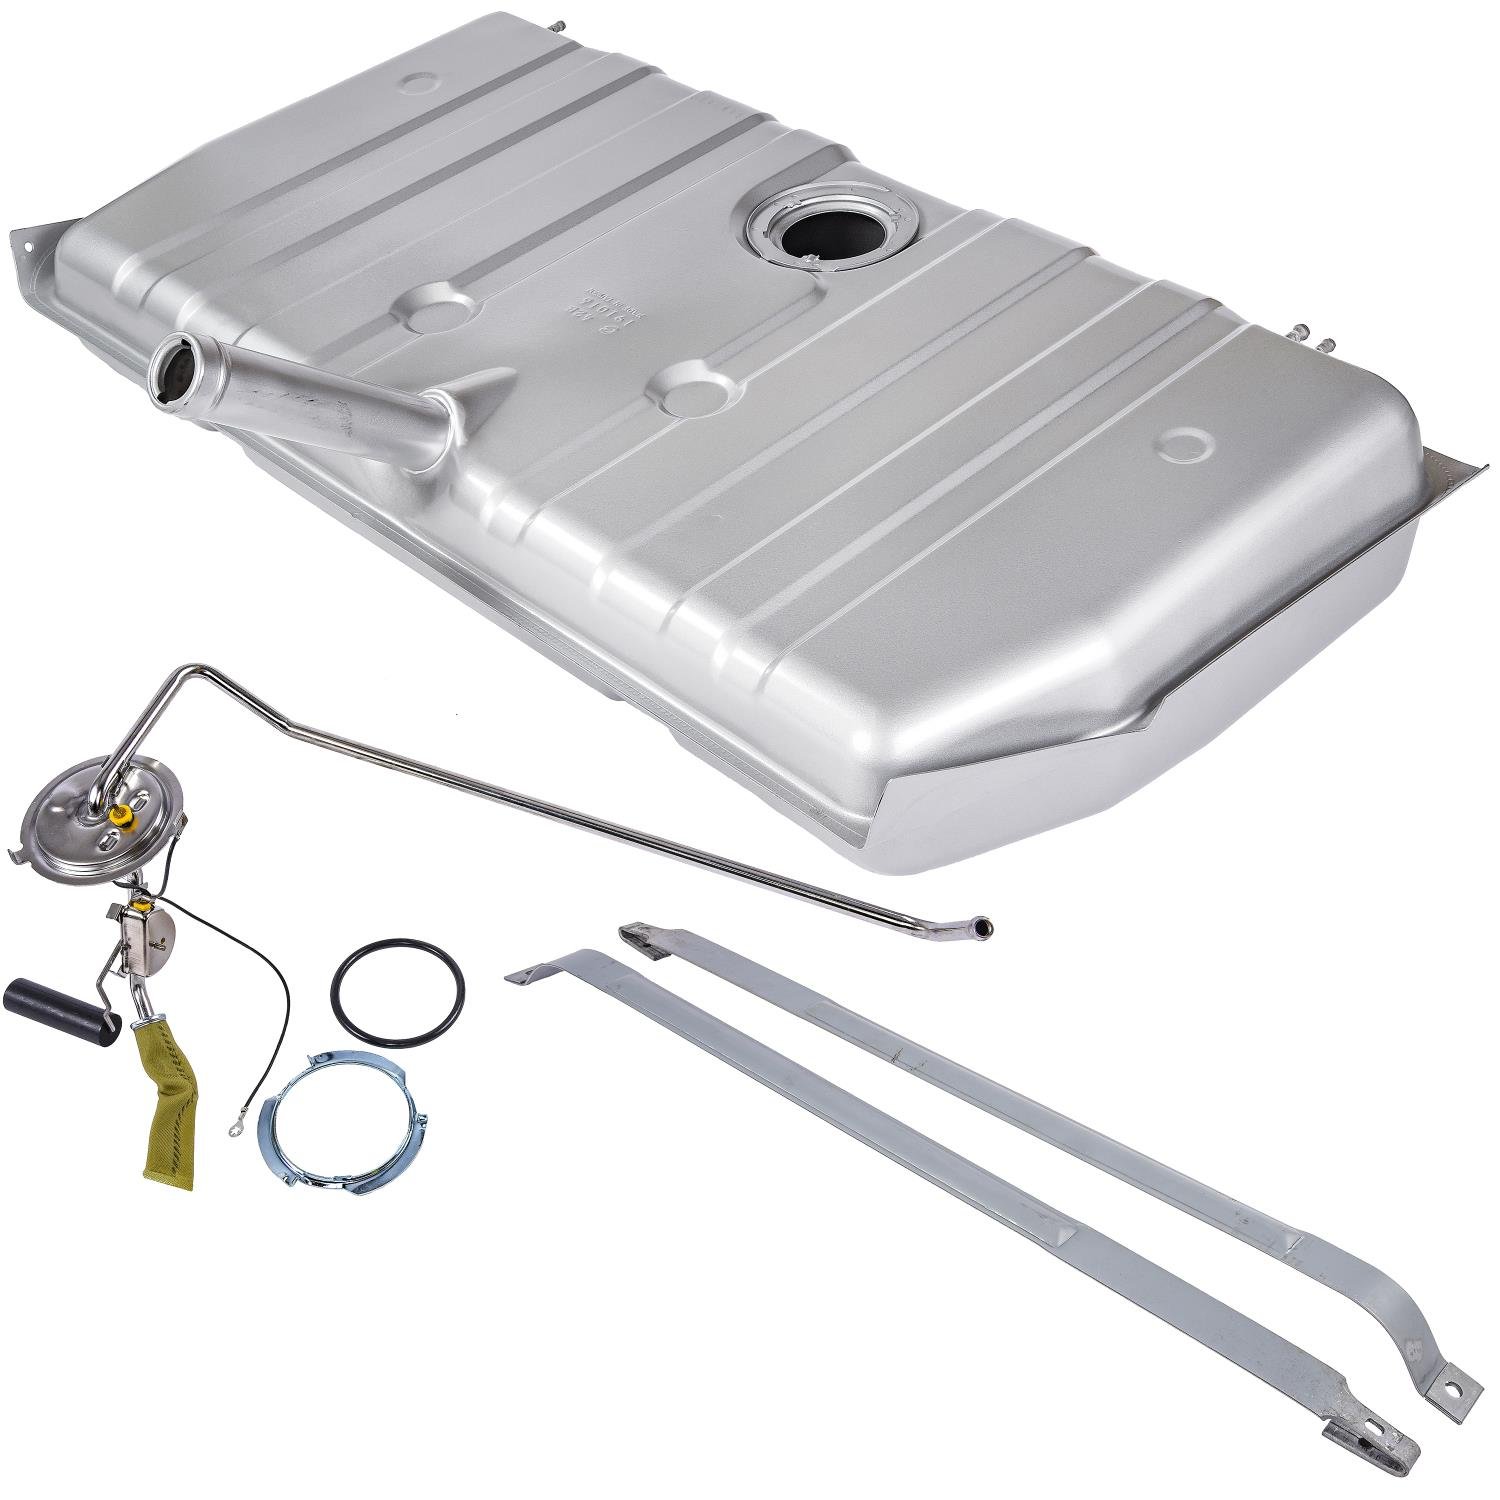 Fuel Tank Kit with Straps & Sending Unit for 1971-1973 Camaro and Firebird [17-Gallon]